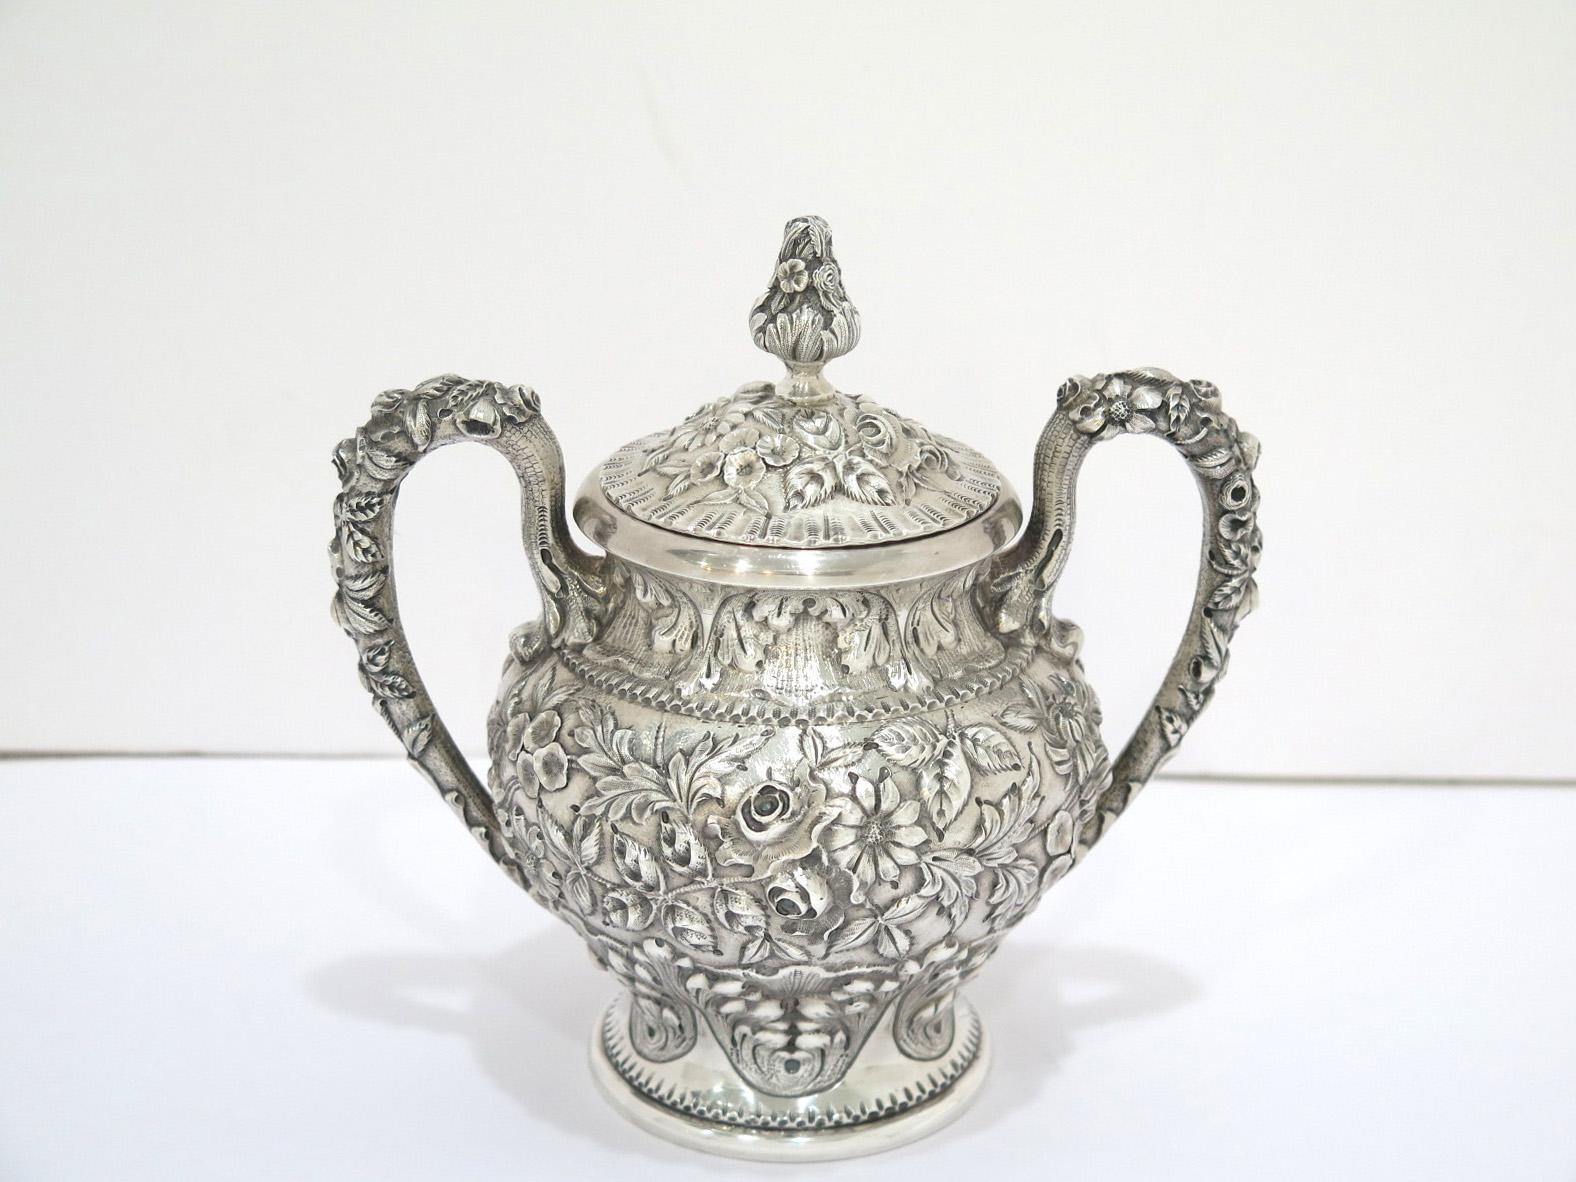 5 Pc Sterling Silver S. Kirk & Son Antique Floral Repousse Tea / Coffee Service For Sale 1